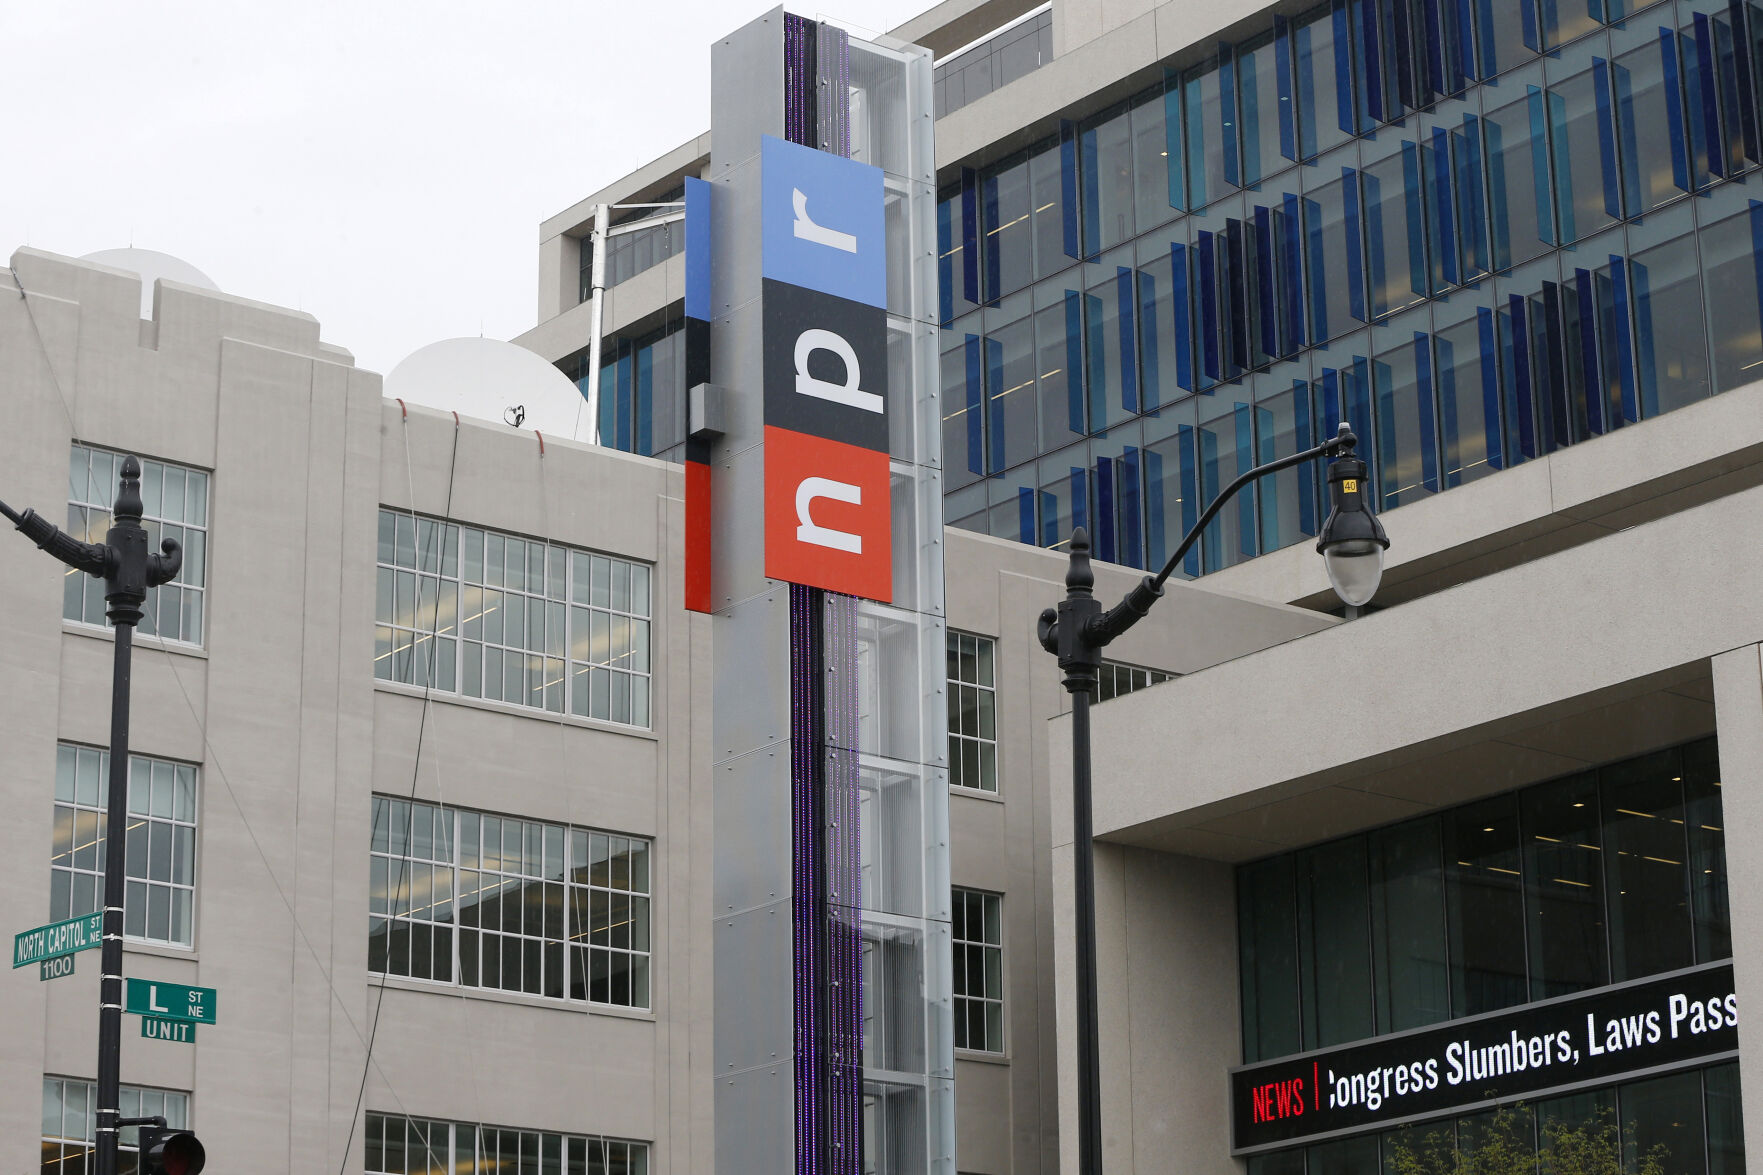 <p>FILE - The headquarters for National Public Radio (NPR) stands on North Capitol Street on April 15, 2013, in Washington. Elon Musk threatened to reassign NPR’s Twitter account to “another company,” according to the non-profit news organization, in an ongoing spat between Musk and media groups since his $44 billion acquisition of Twitter last year. (AP Photo/Charles Dharapak, File)</p>   PHOTO CREDIT: Charles Dharapak - staff, AP